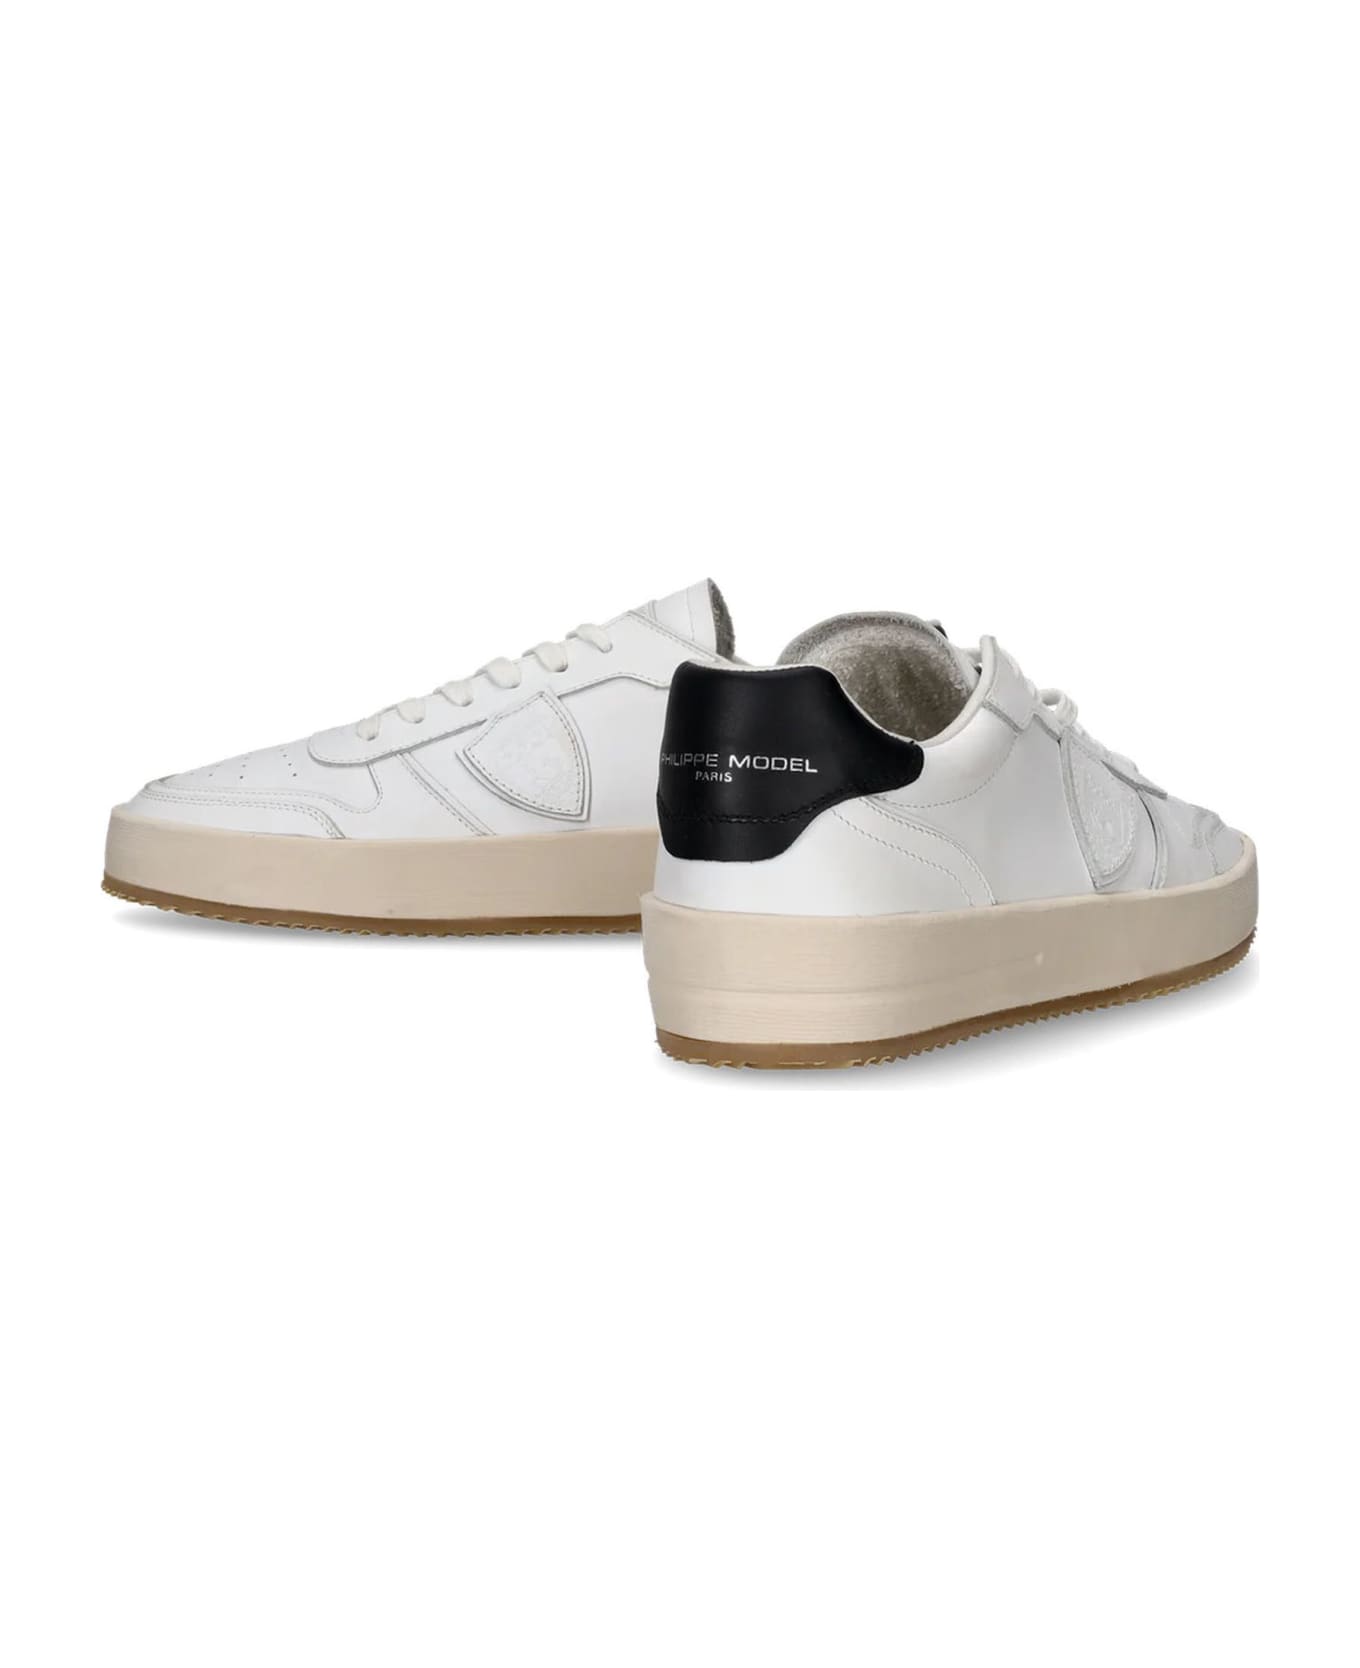 Philippe Model Nice Low-top Sneakers In Leather, White Black - White スニーカー